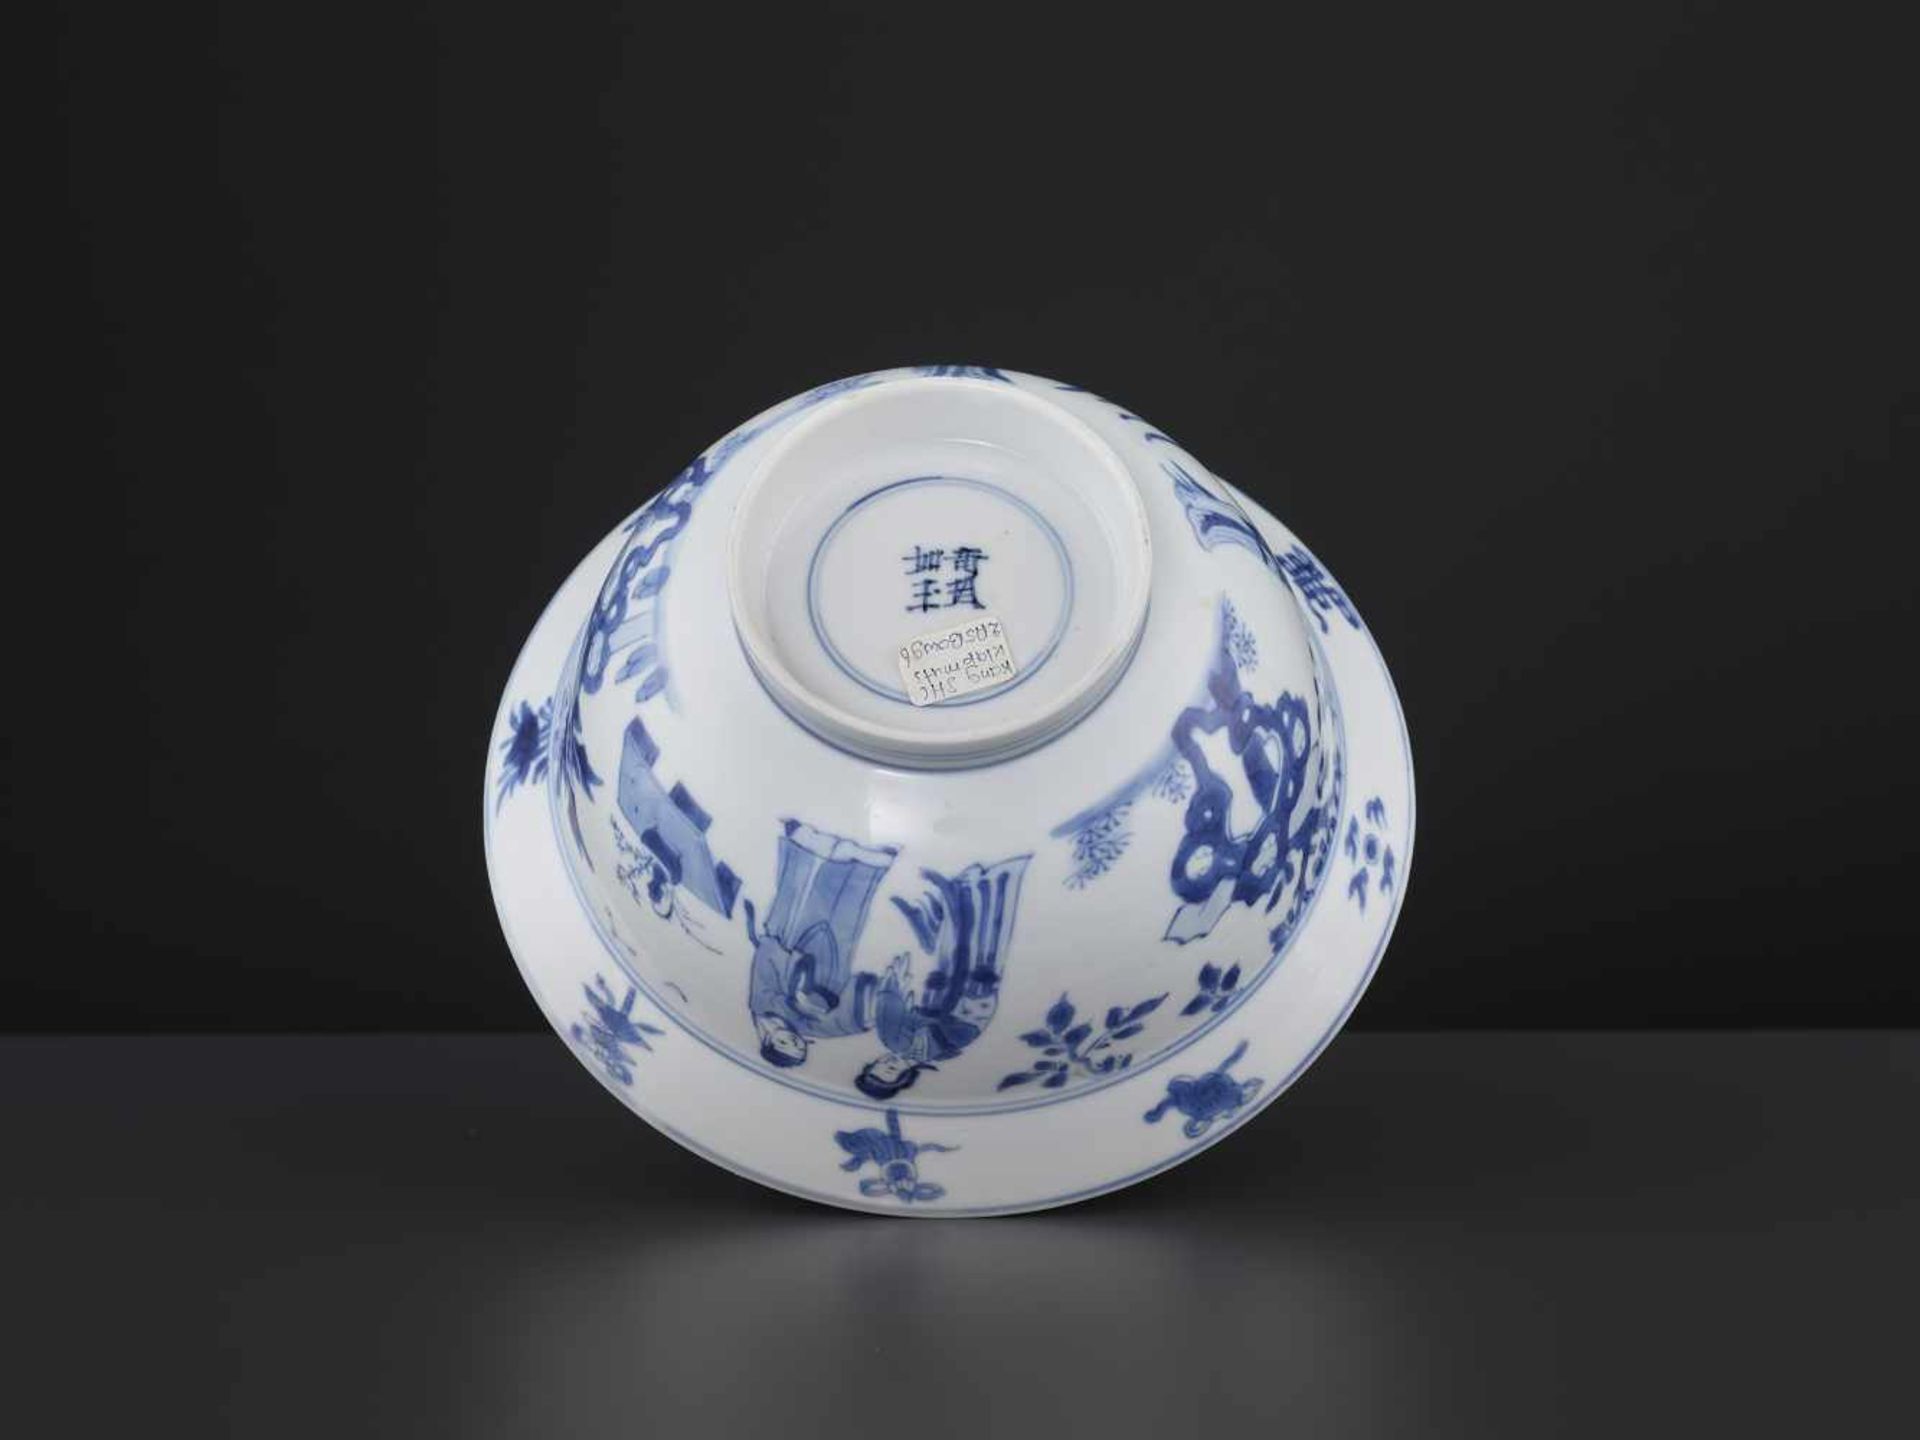 A KANGXI BLUE & WHITE KLAPMUTS BOWLChina, 1662-1722. Delicately painted with scenes from ‘Romance of - Image 7 of 8